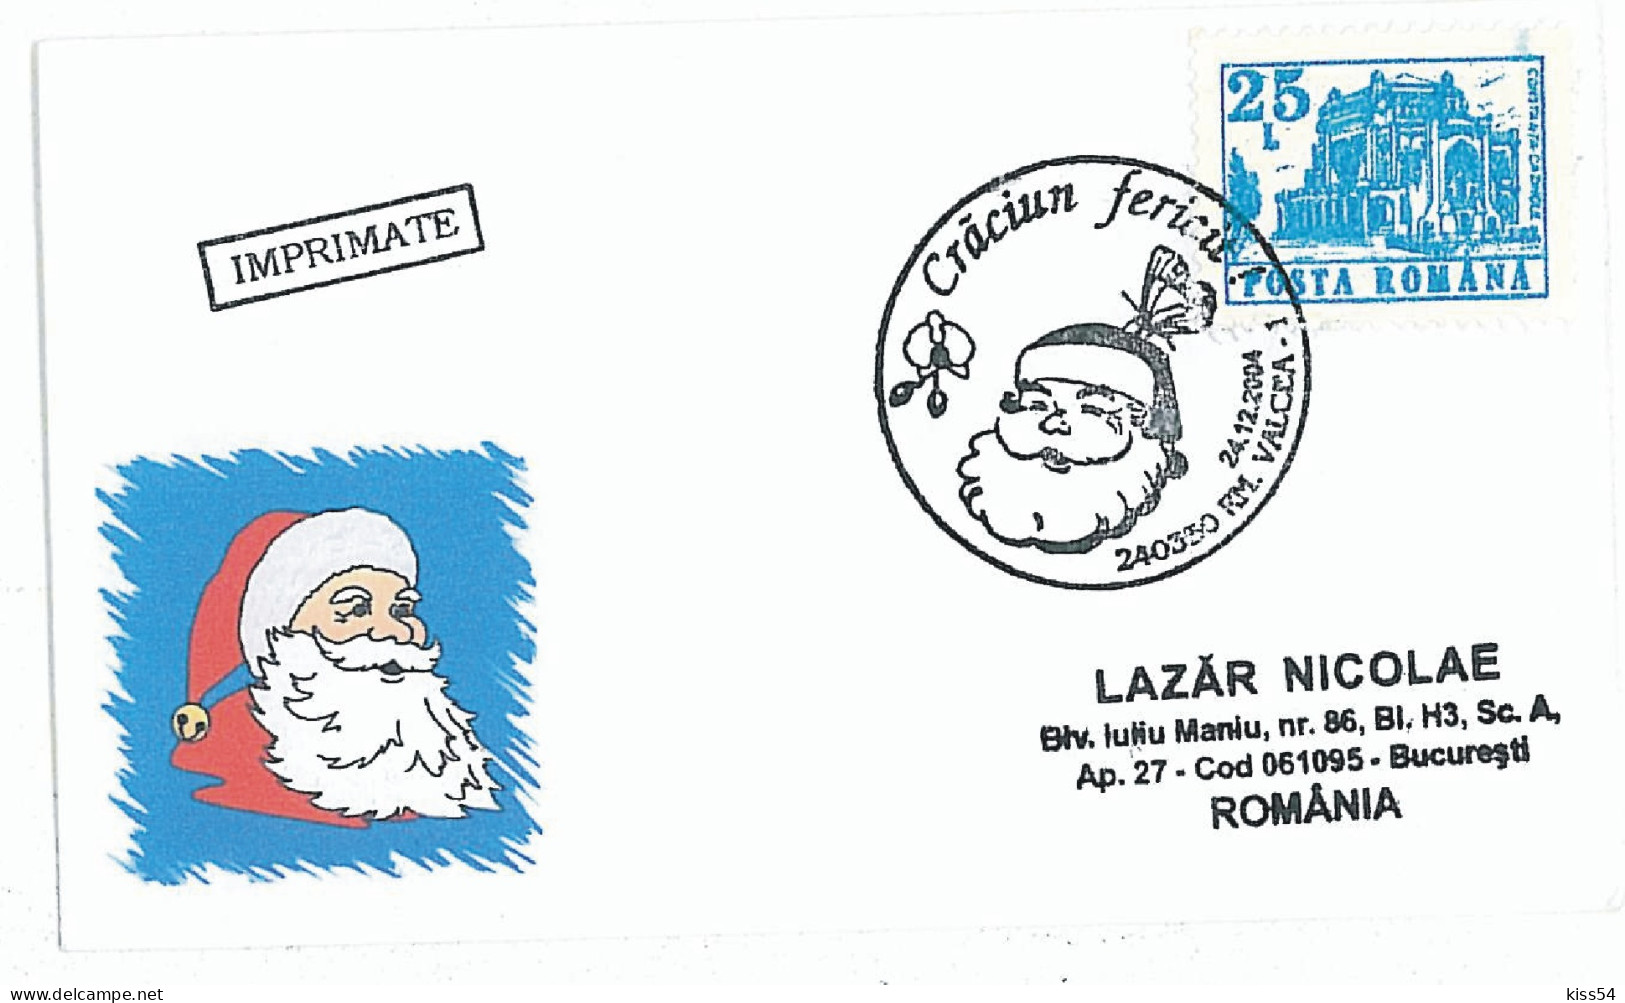 CV 27 - 1232-a SANTA CLAUS, Romania - Cover + Greeting Card - Used - 2004 - Weihnachten